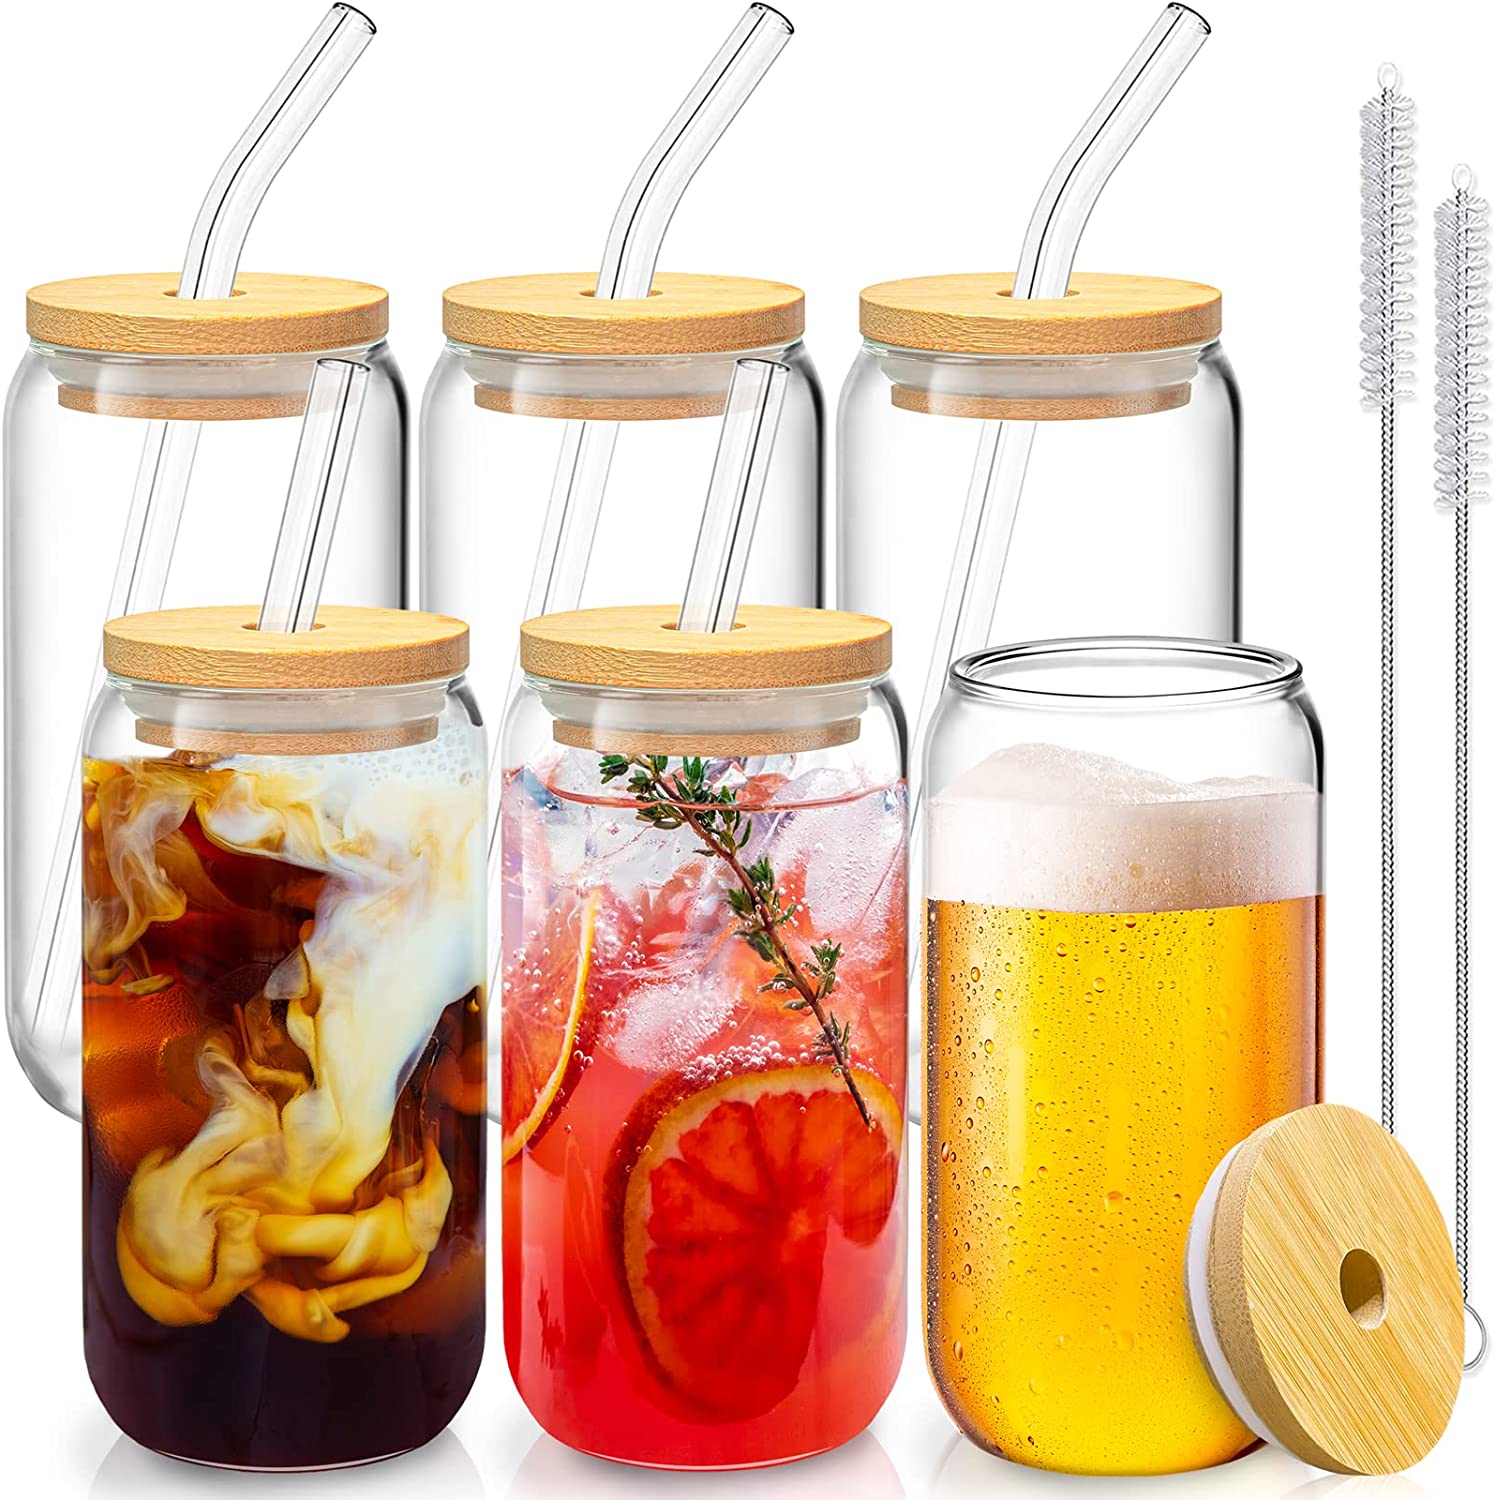 Wirsh Drinking Glasses 18oz with Bamboo Lids and Glass Straws Set 4 Pcs